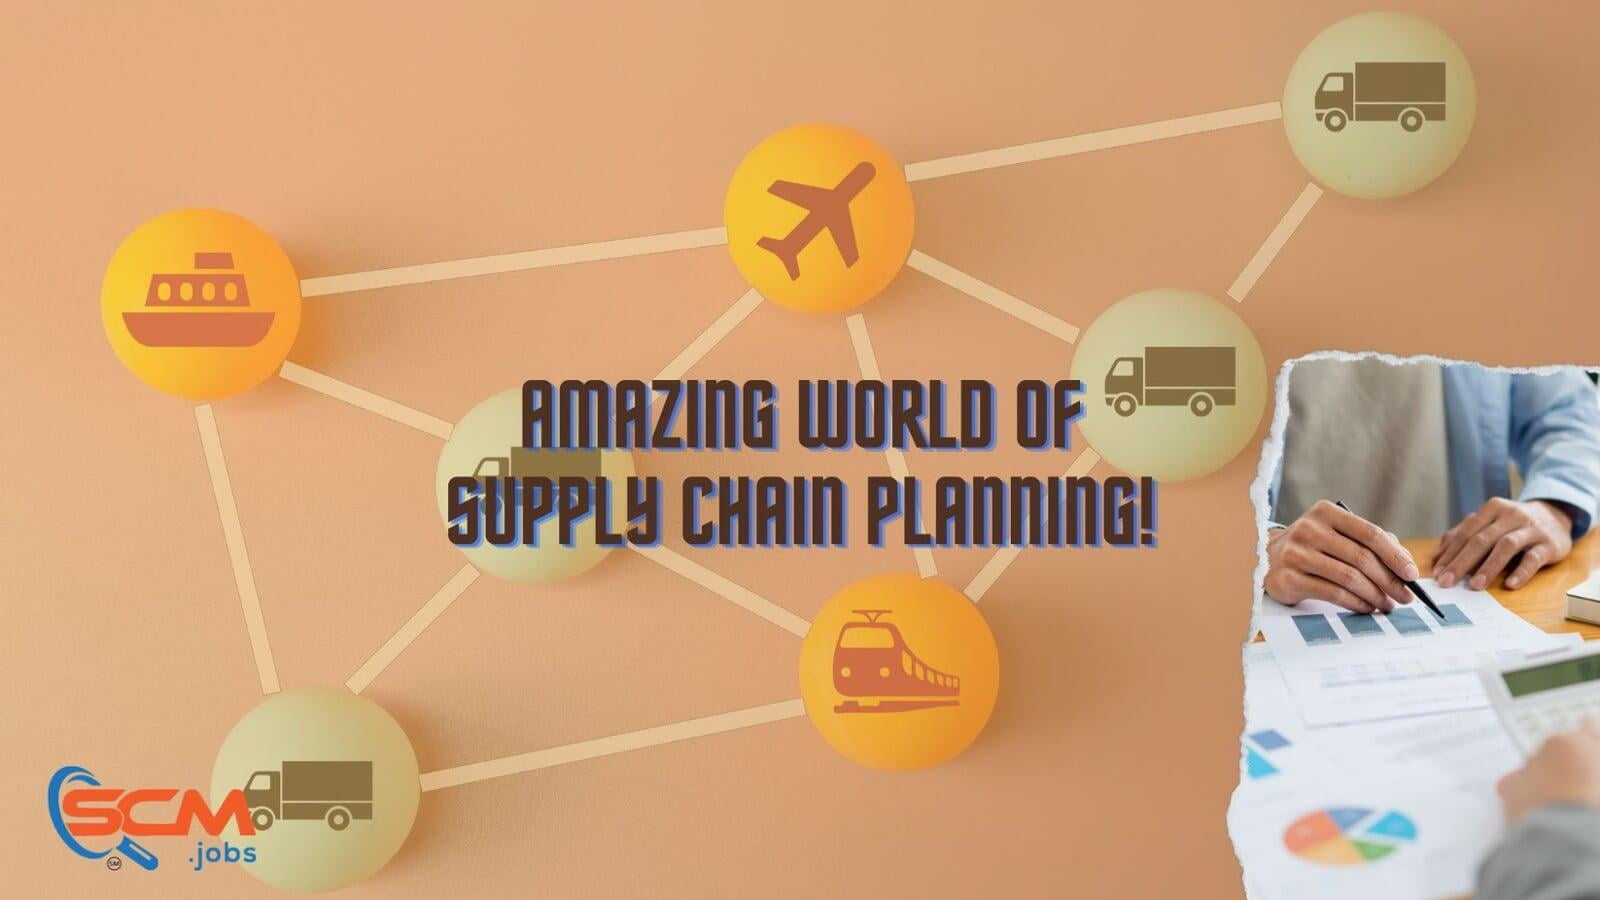 Explore the Amazing World of Supply Chain Planning!